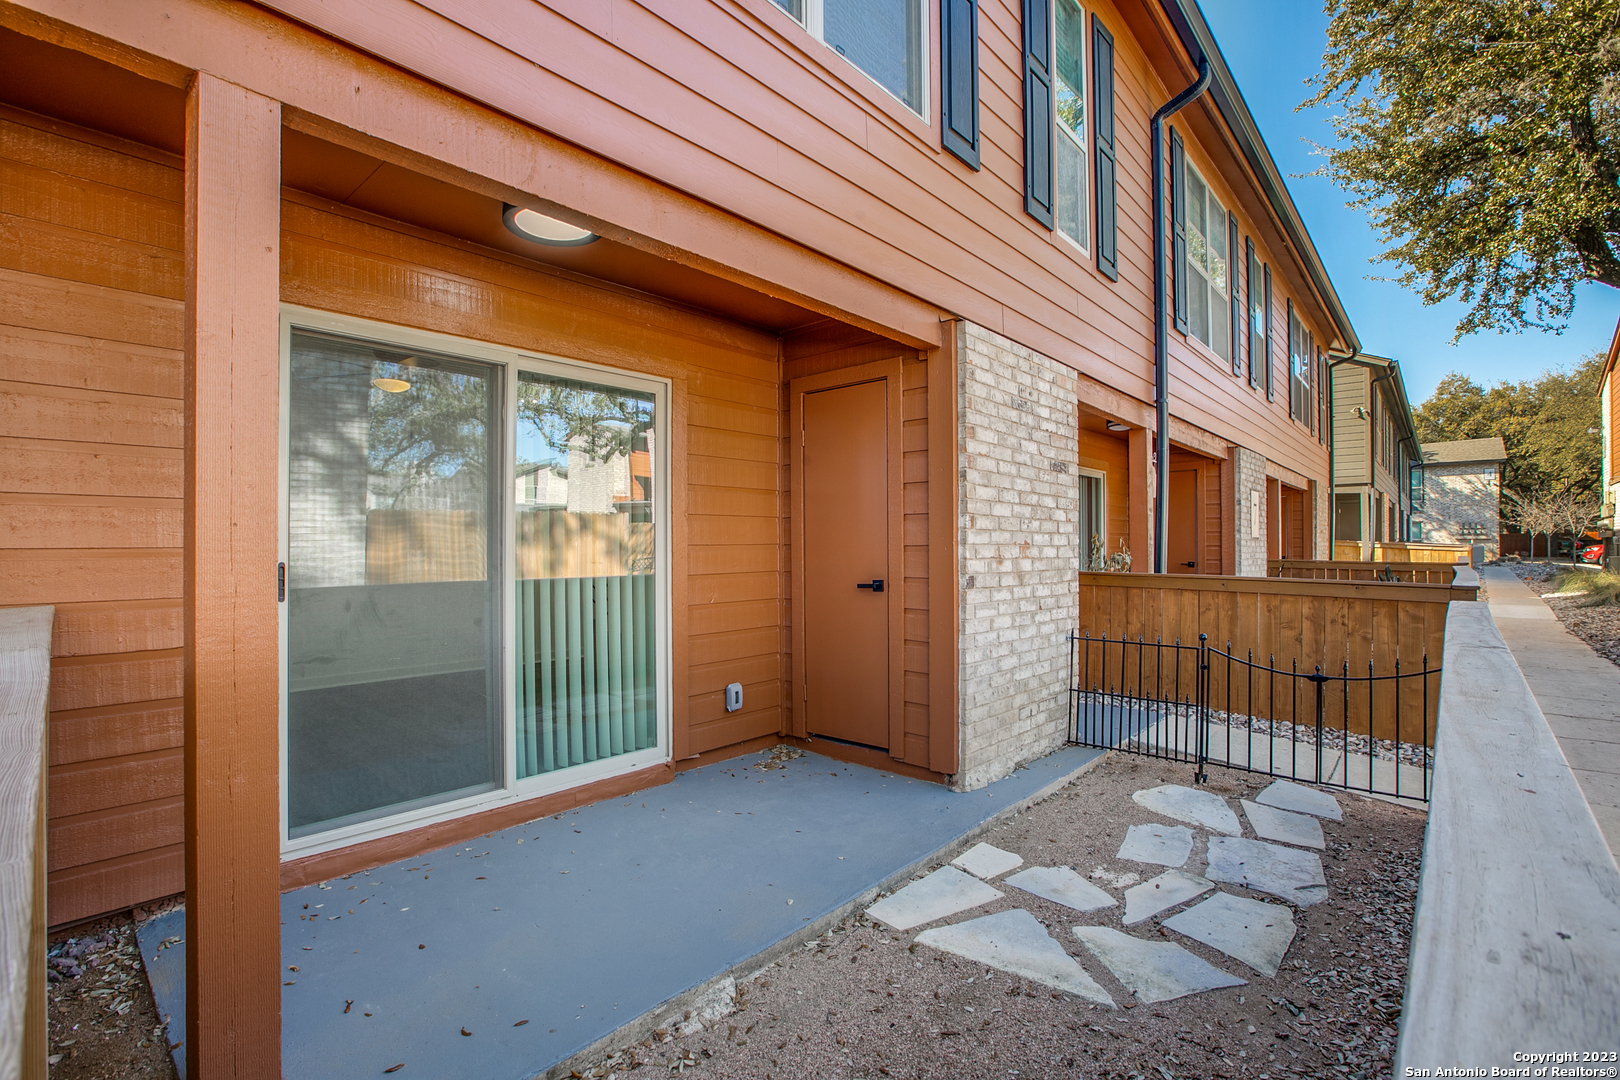 Newly and Meticulously remodeled condominium in Calder Park, located in North Central San Antonio just off Jones Maltsberger. This spacious 2 bed, 2 1/2 bath, 1250 +/- square foot town home is part of a 40 unit, non-smoking and gated enclave community with easy access to 281, 1604, 410 & Airport. Huge live oaks, professional landscaping throughout and a maintenance-free, privately fenced backyard complete the community's park like-setting. Everything is brand new in this clover plan option with designer touches everywhere. It's San Antonio condo living at its finest! Come see it today.